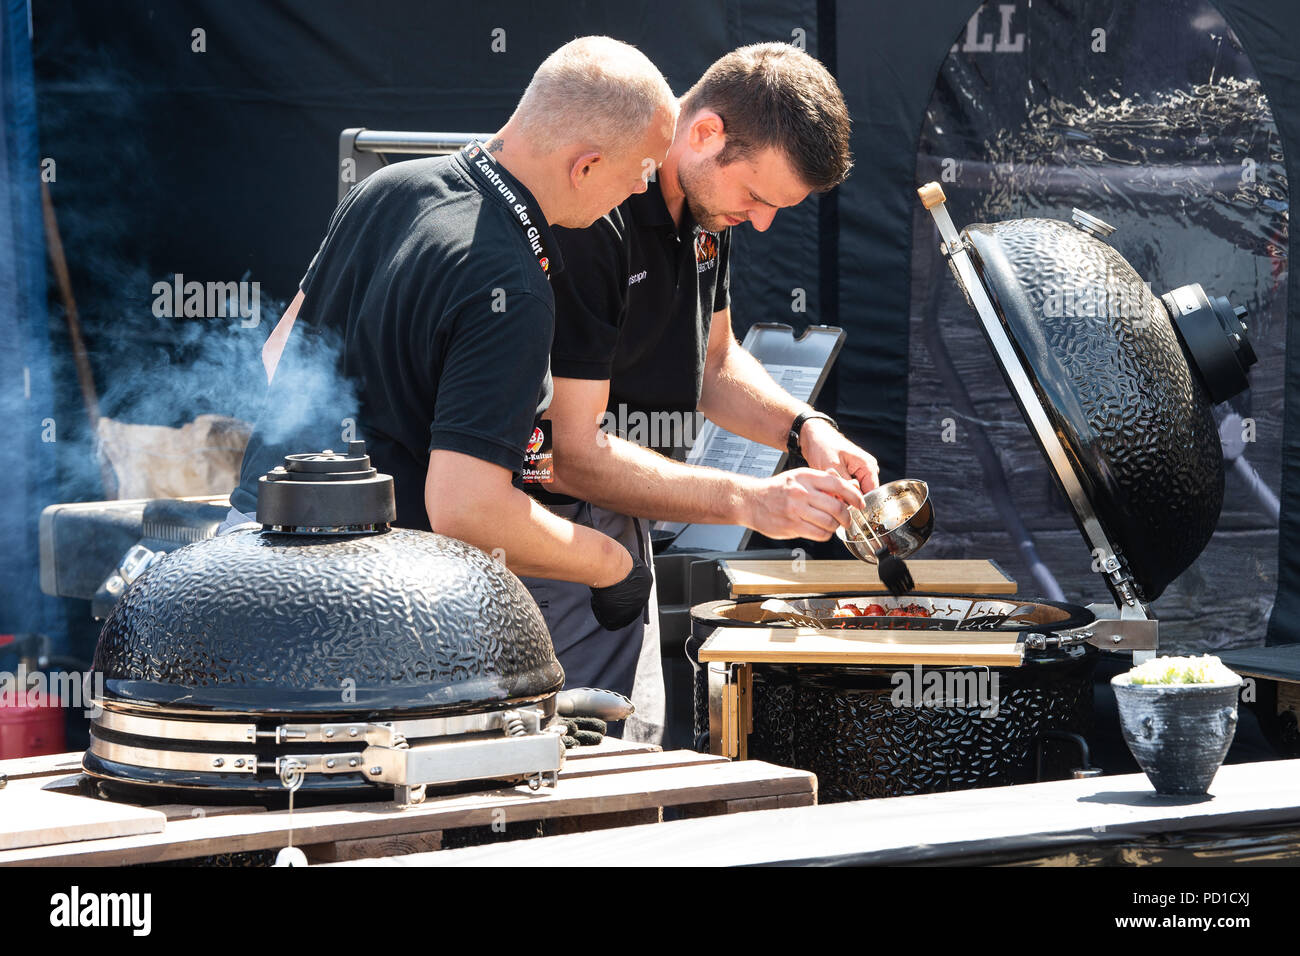 Fulda, Germany. 05th Aug, 2018. Participants stand at a kettle grill. Over  35 competition teams compete in two classes for the title of "German BBQ  King 2018". Credit: Swen Pförtner/dpa/Alamy Live News